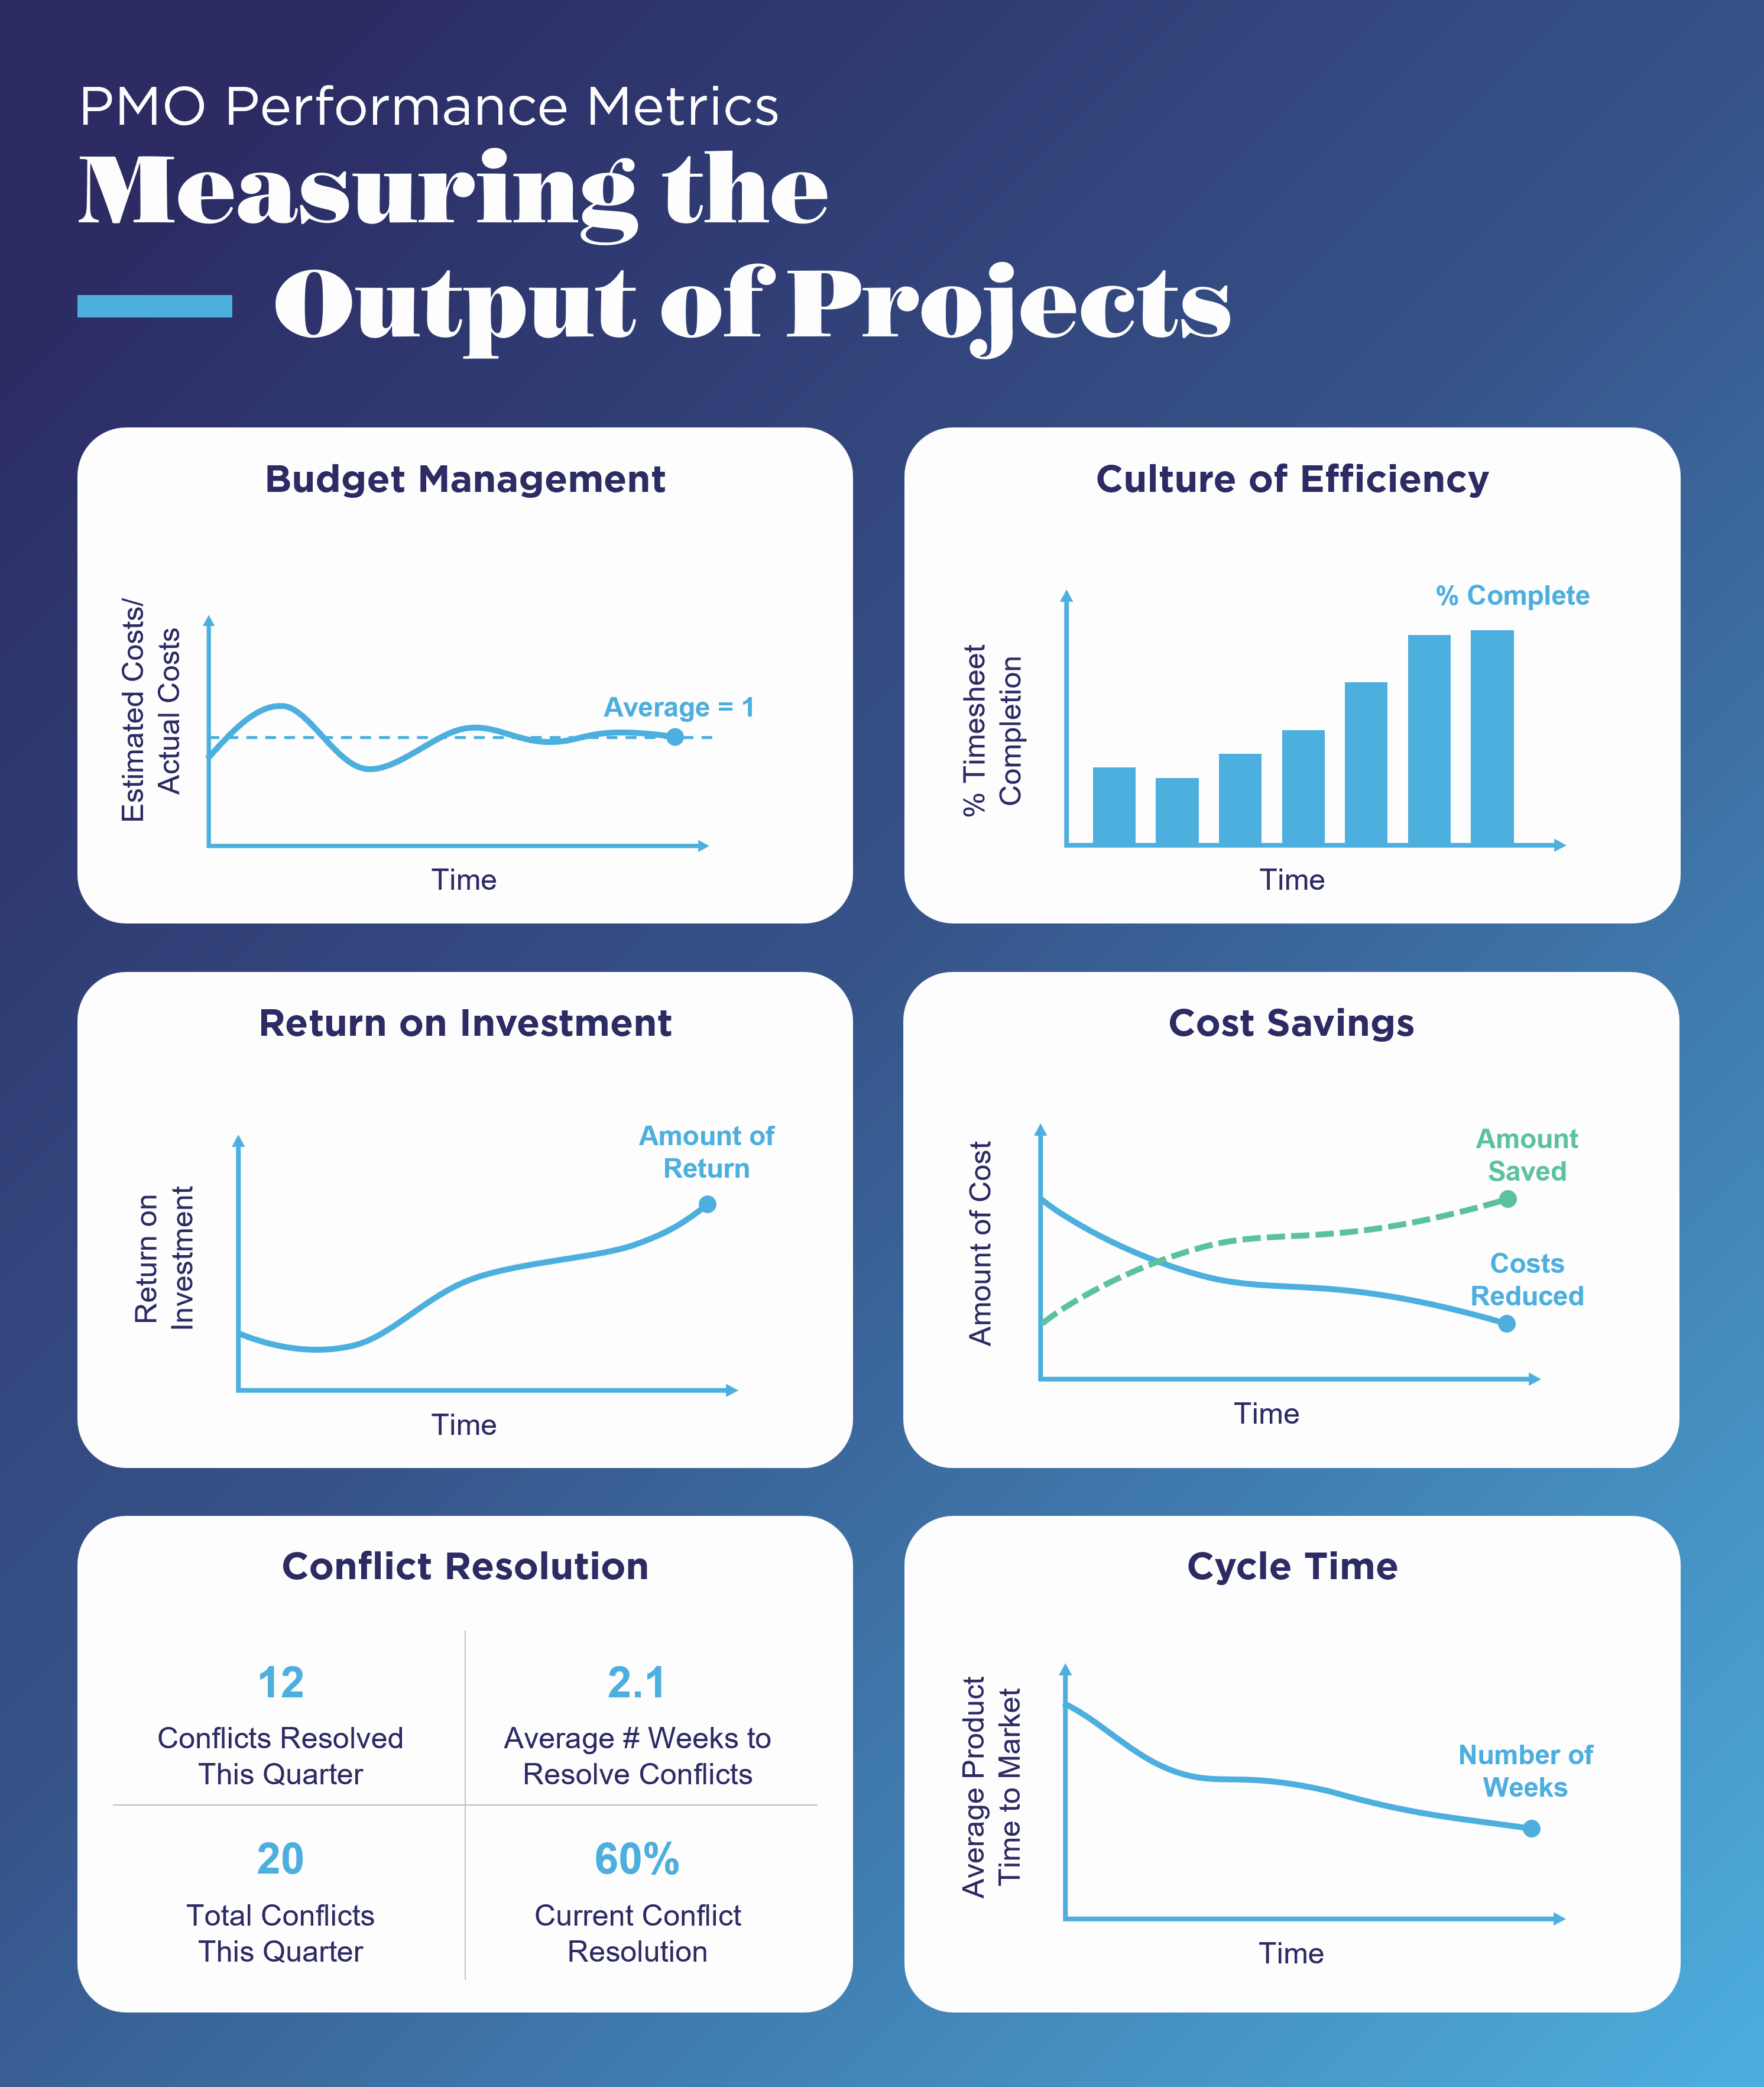 PMO Performance Metrics: Measuring the Output of Projects